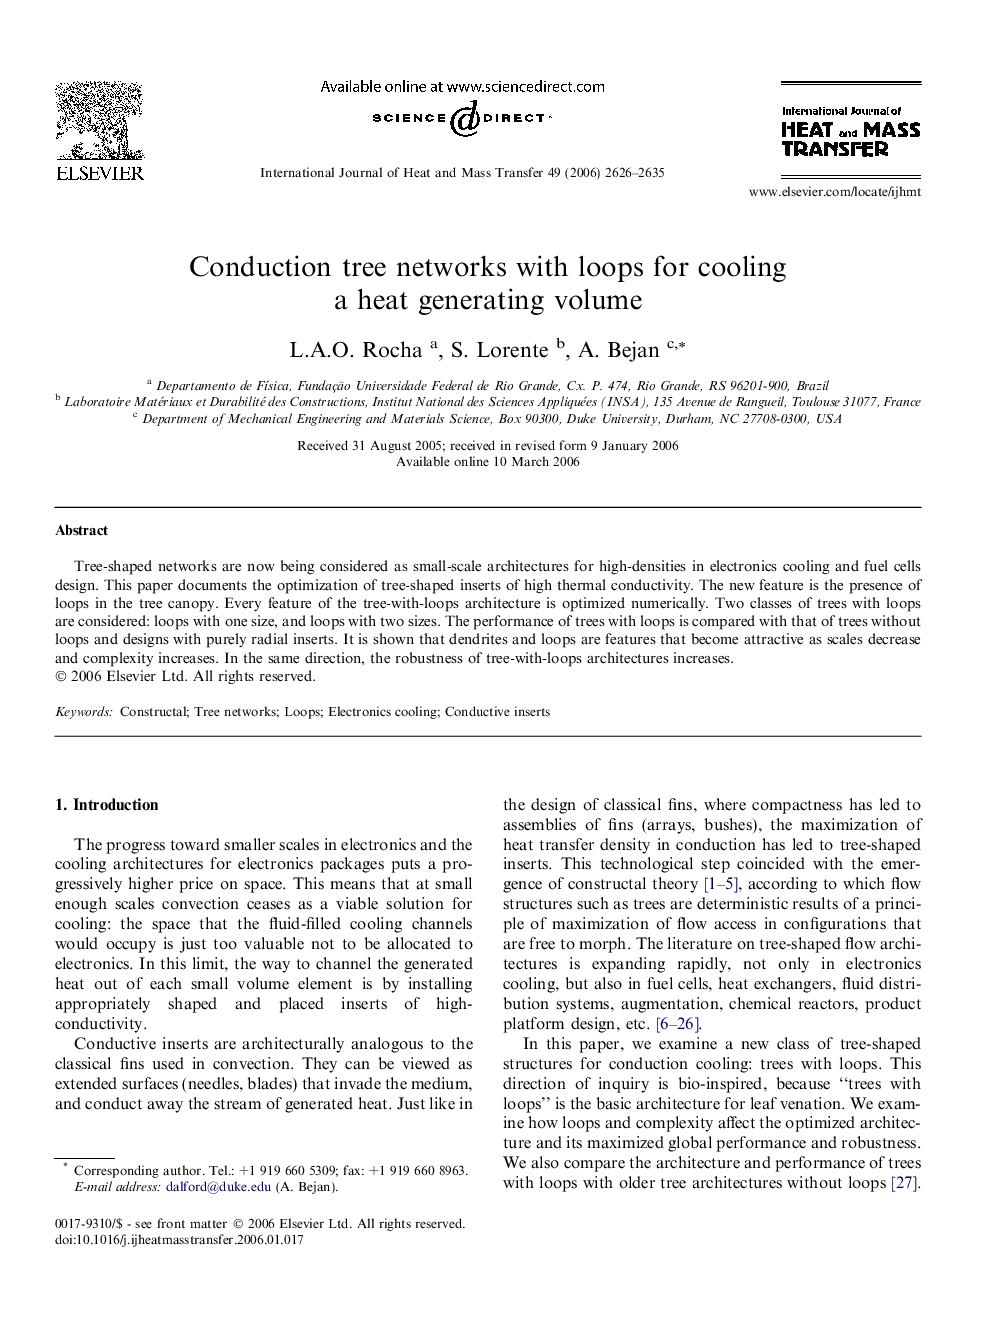 Conduction tree networks with loops for cooling a heat generating volume